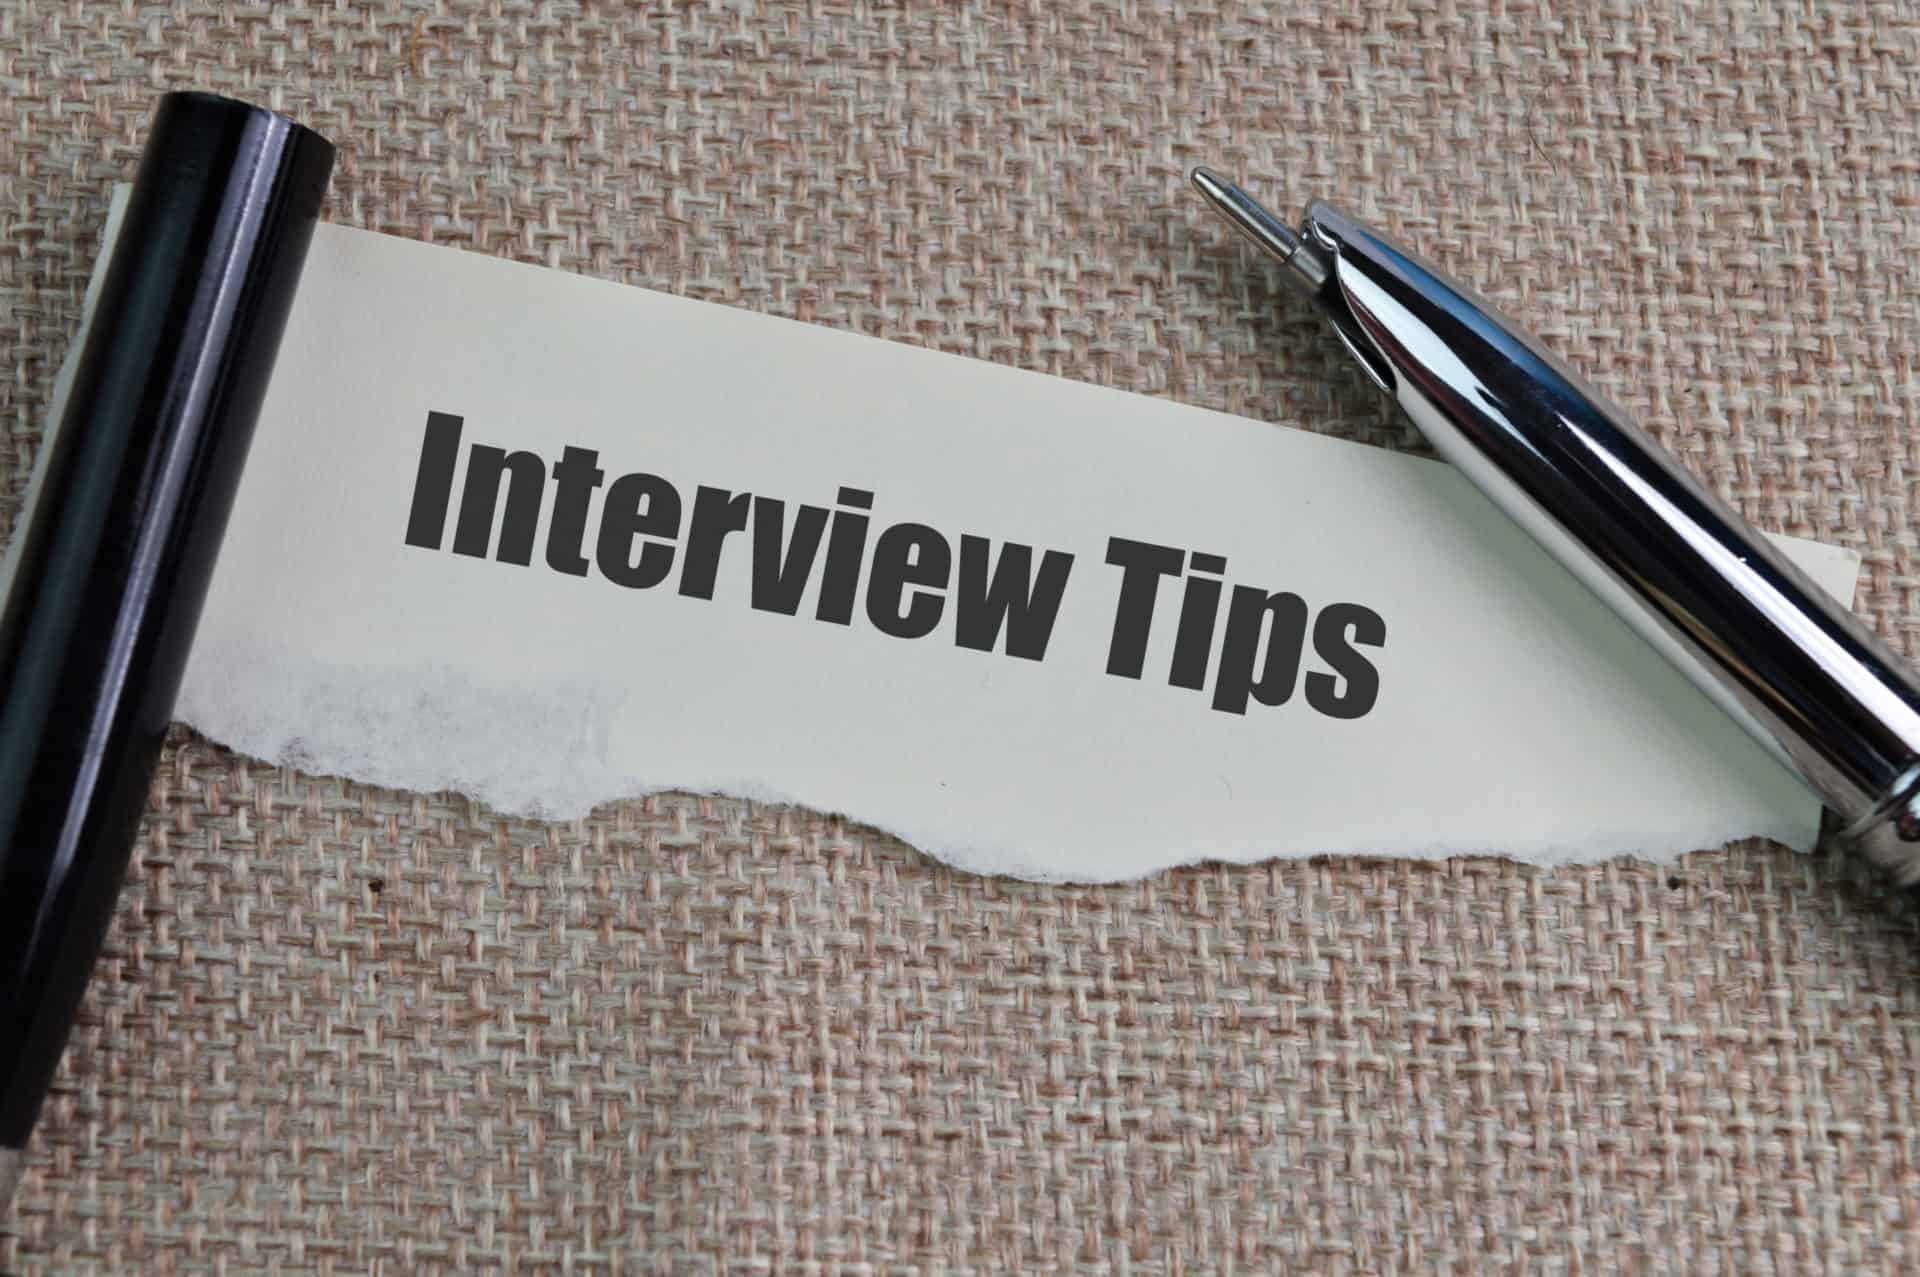 Top 3 Tips Hiring Managers Look For